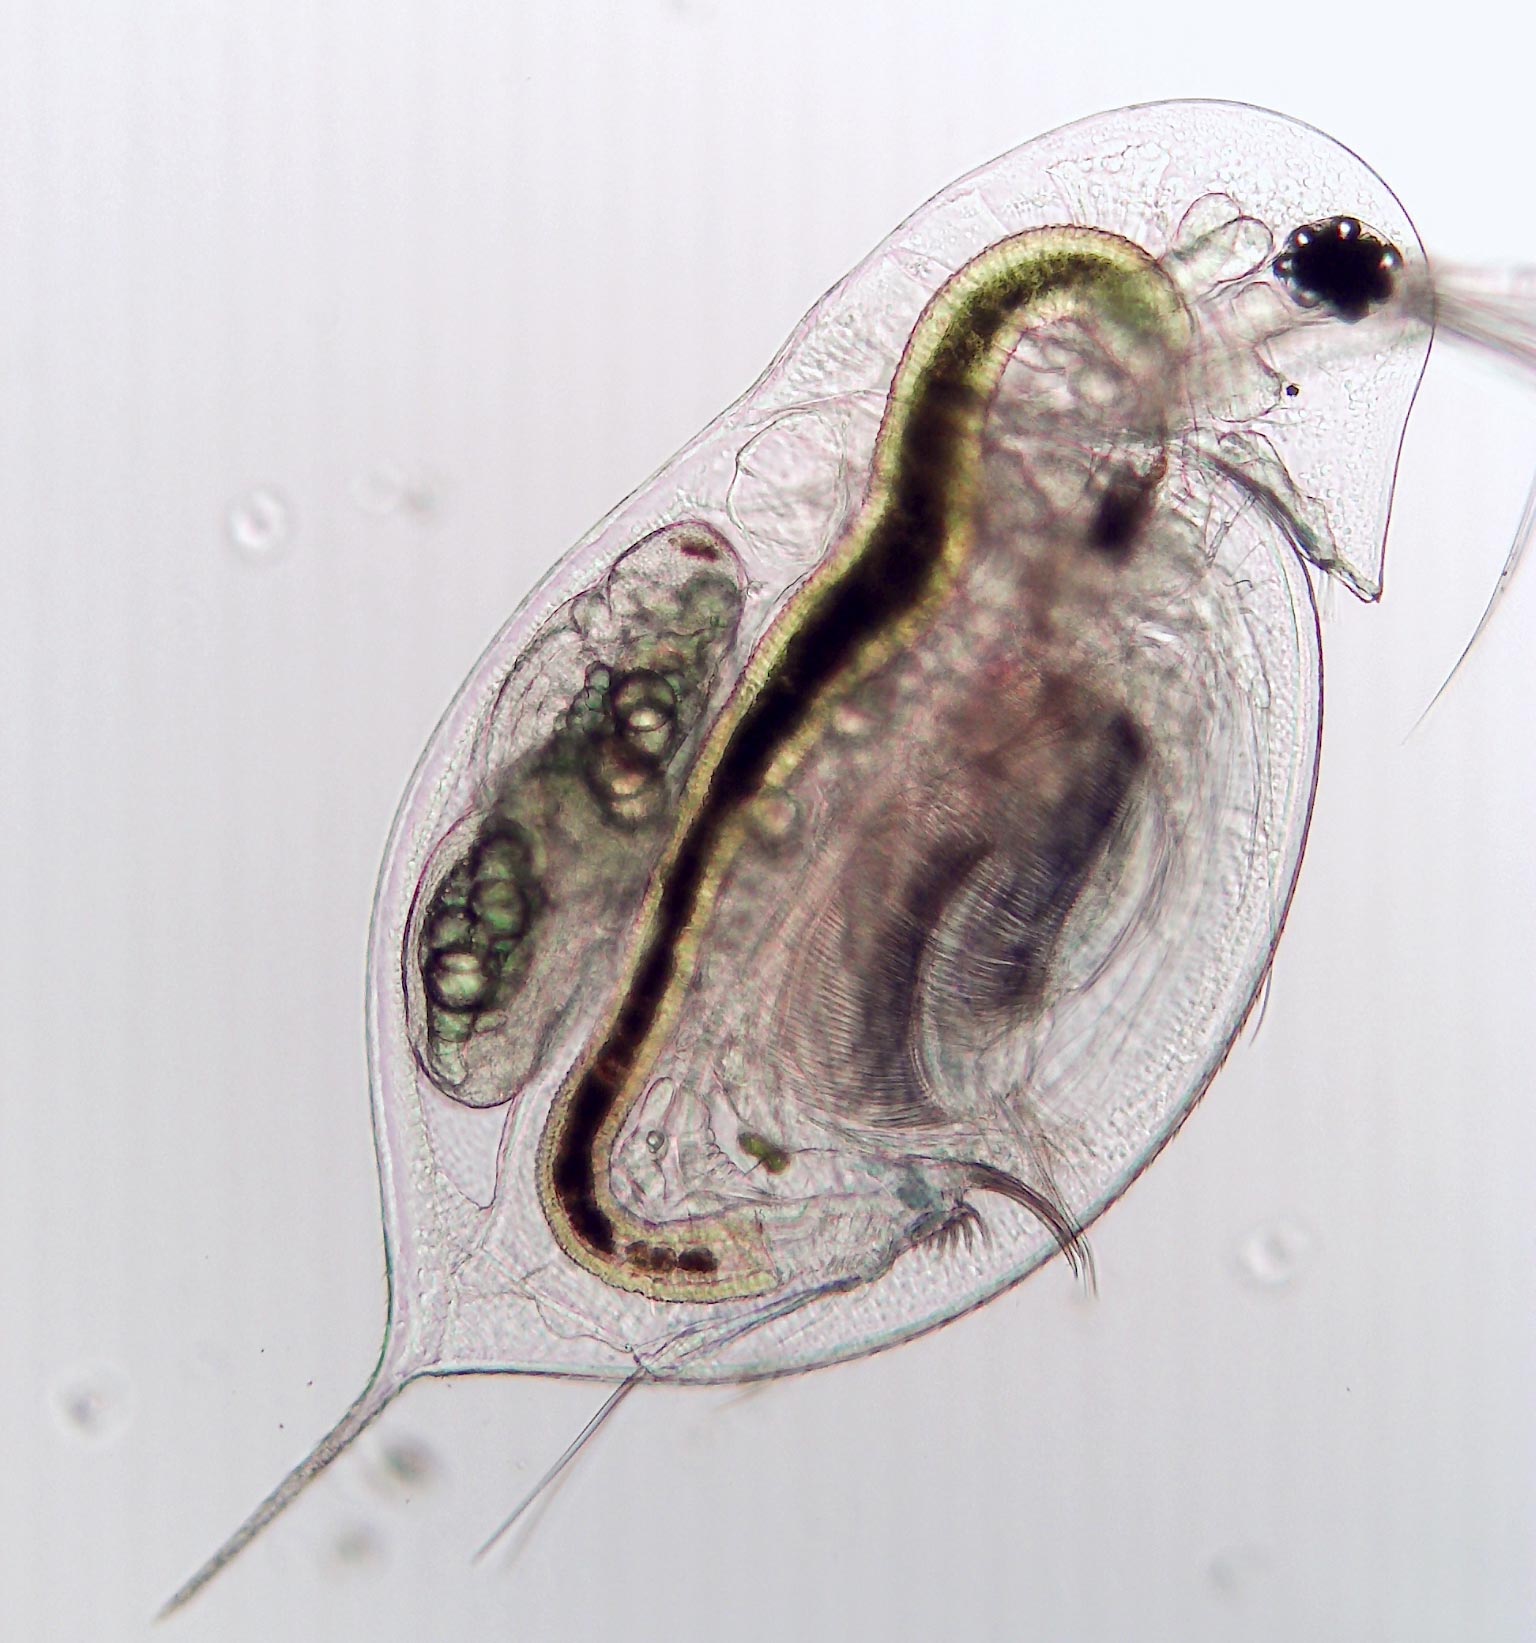 Infected Plankton Hold Secrets to Preventing Pandemics